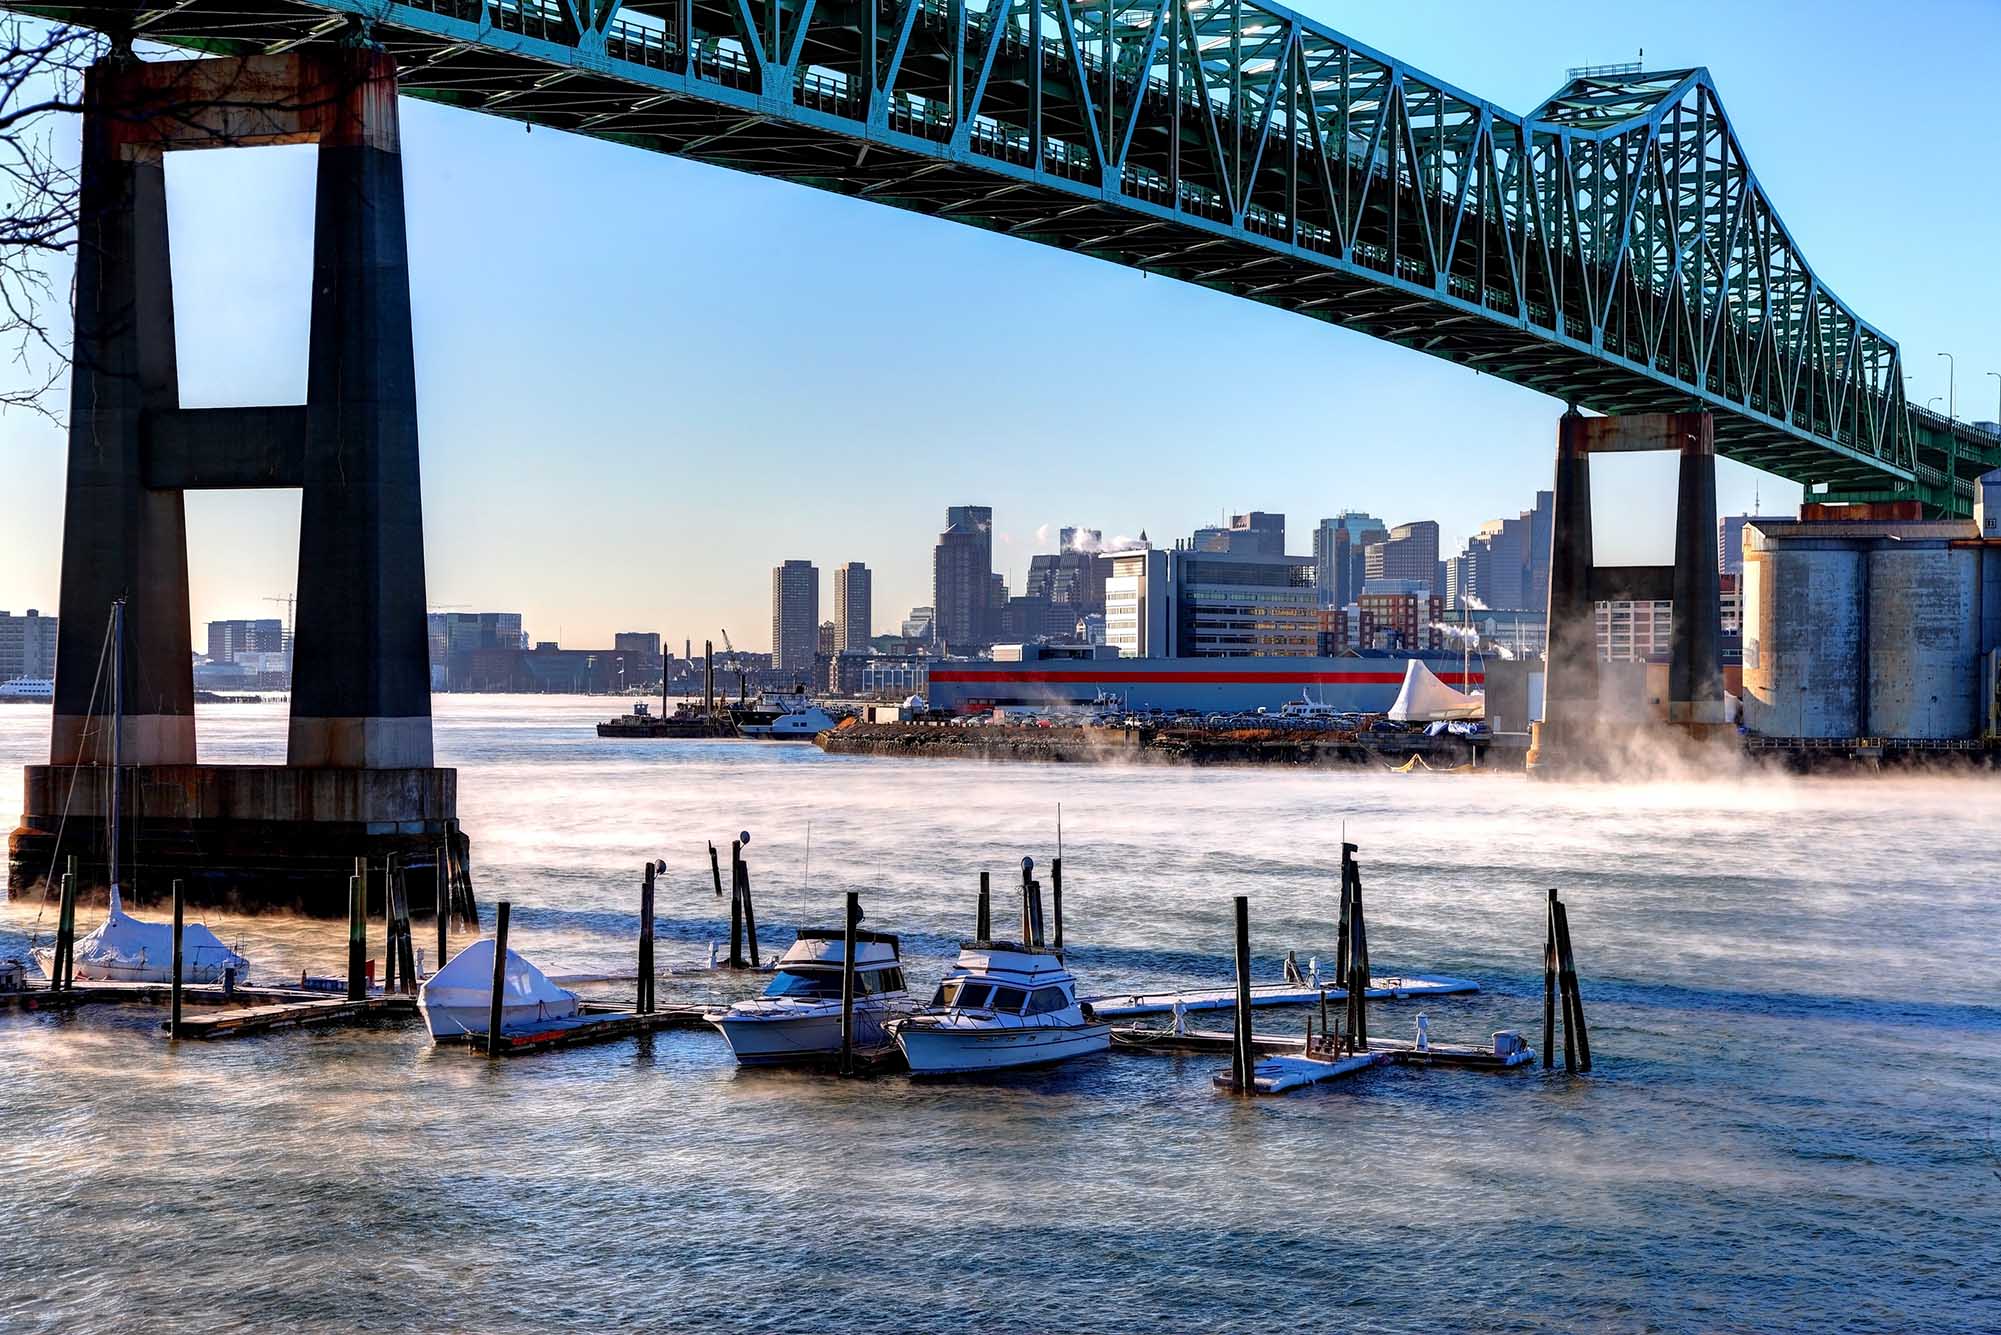 Photo: The Tobin Bridge is shown over the Mystic River in Massachusetts. A large, cantilever truss bridge is shown over a slightly foggy body of water with a small line of boats docked underneath. The city of Boston can be seen in the distant skyline.